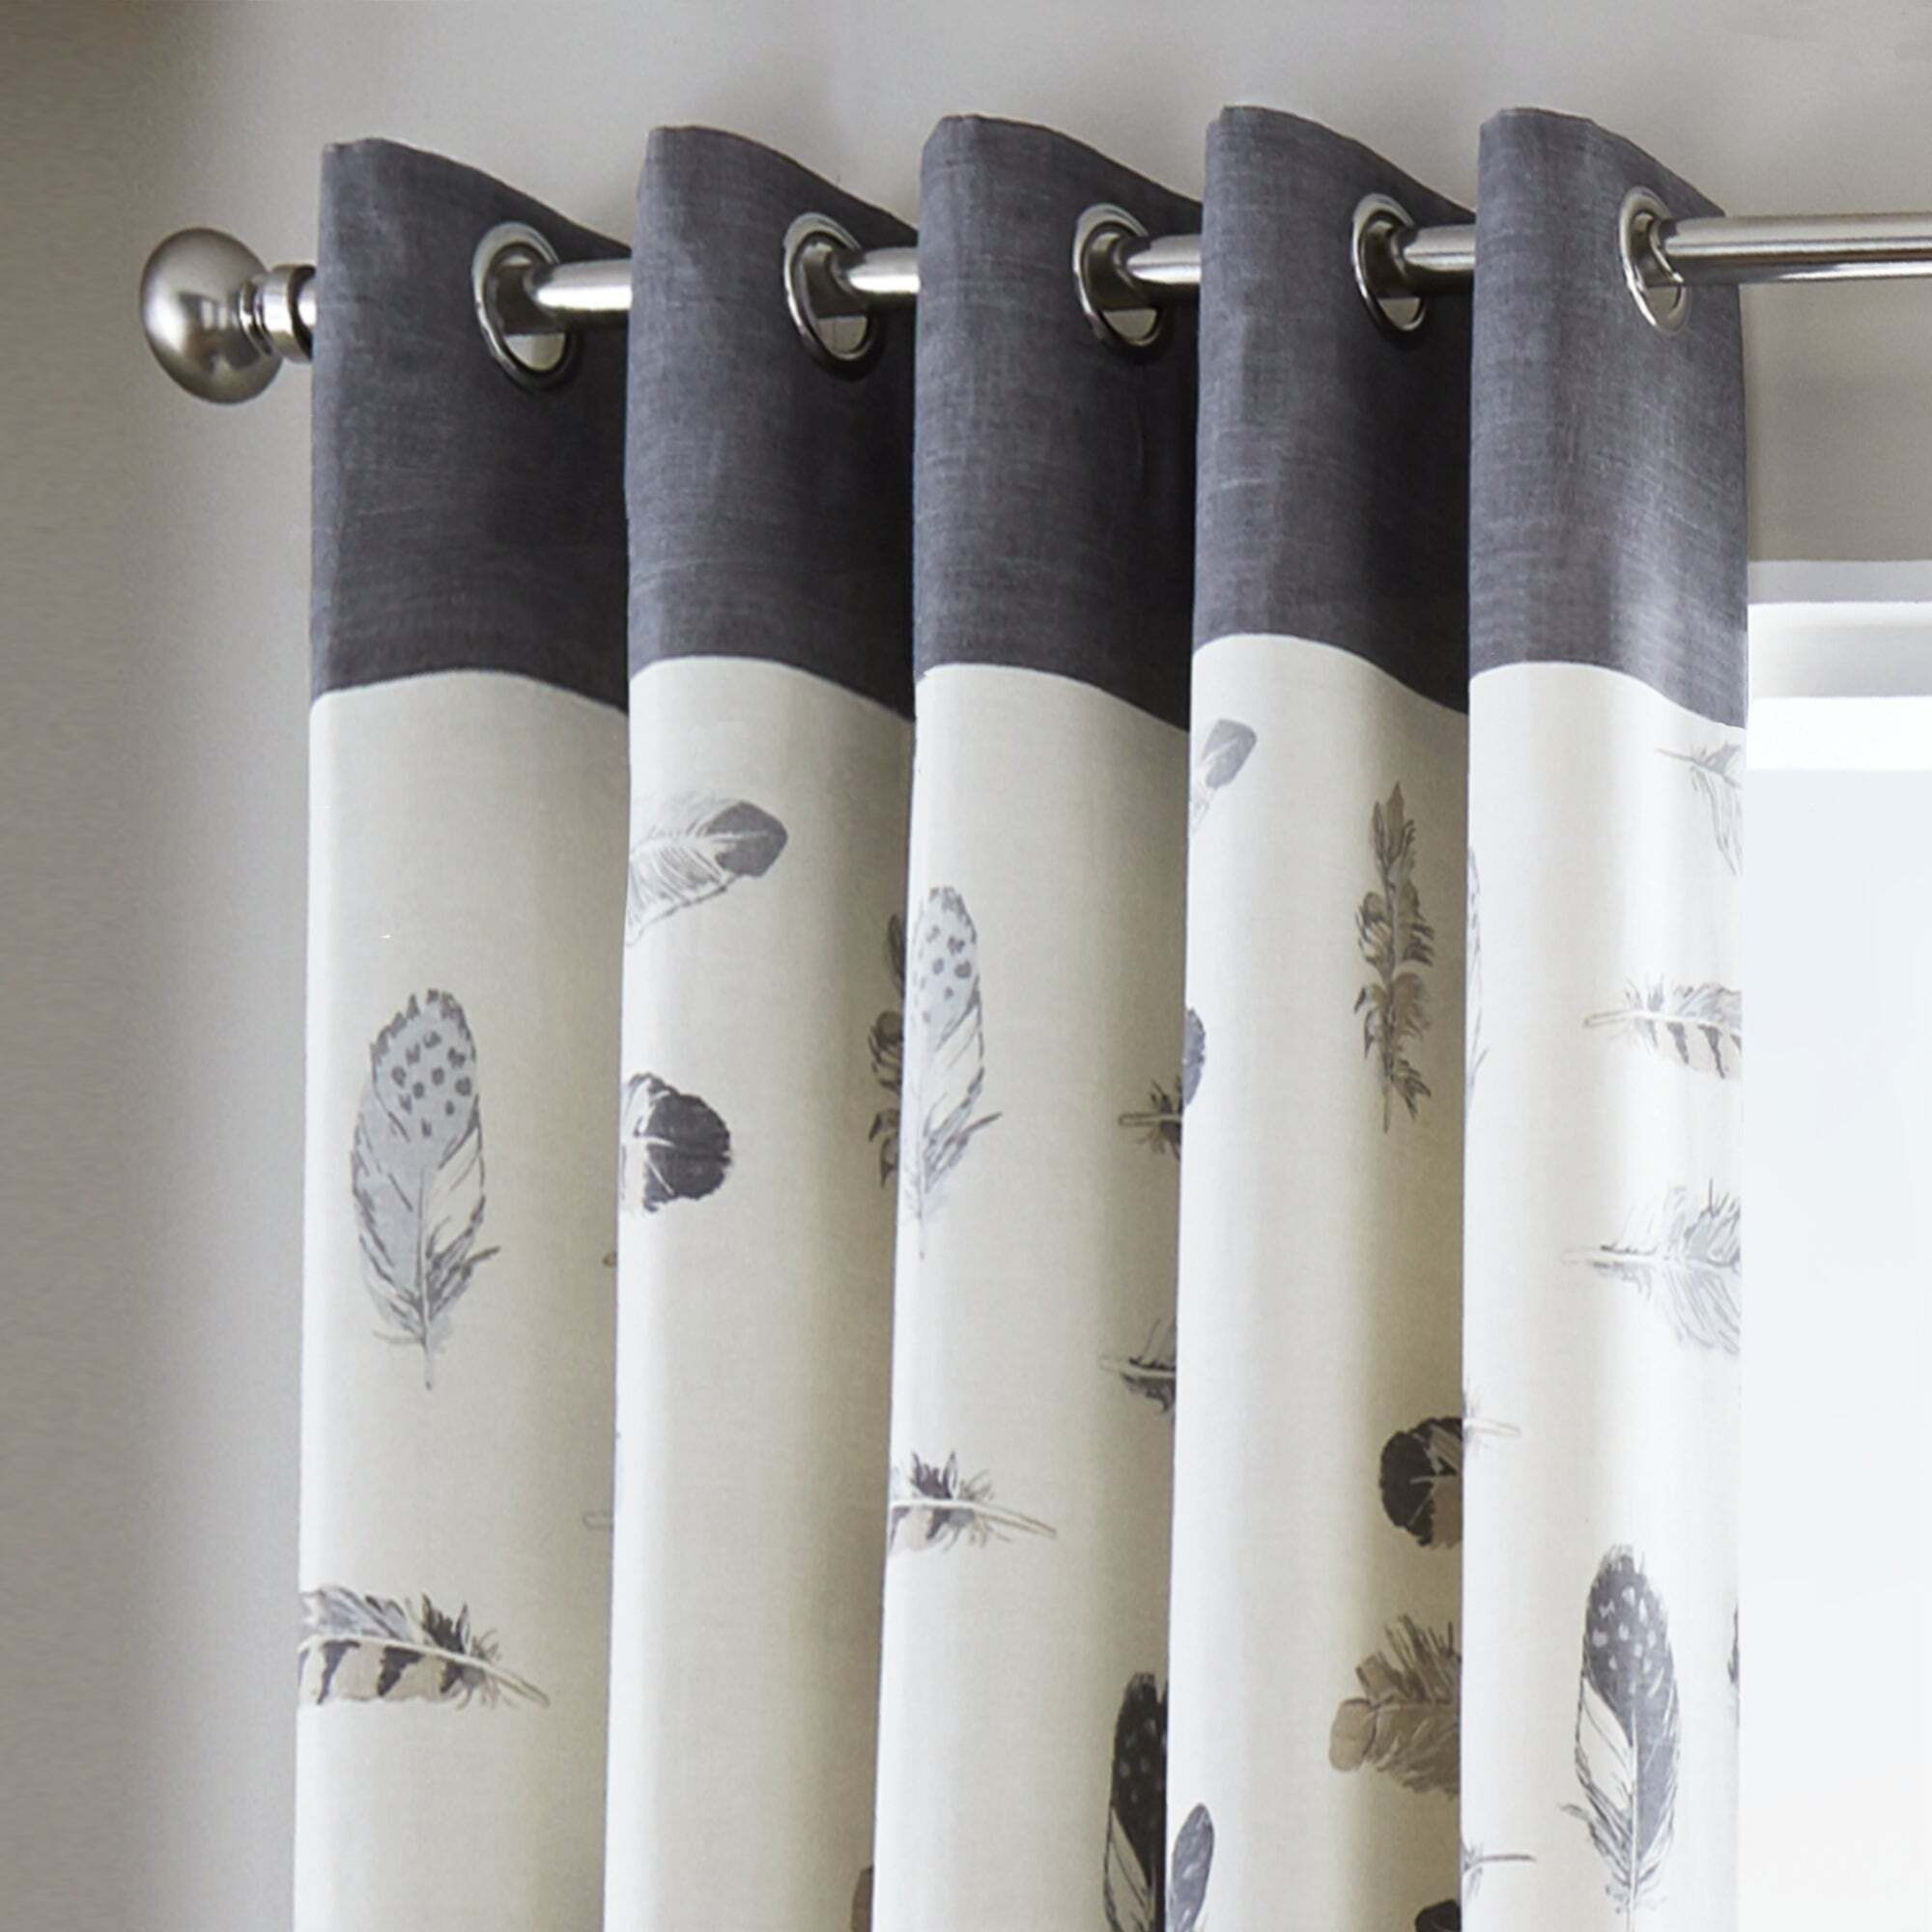 Idaho Charcoal Feather Eyelet Curtains Grey and White